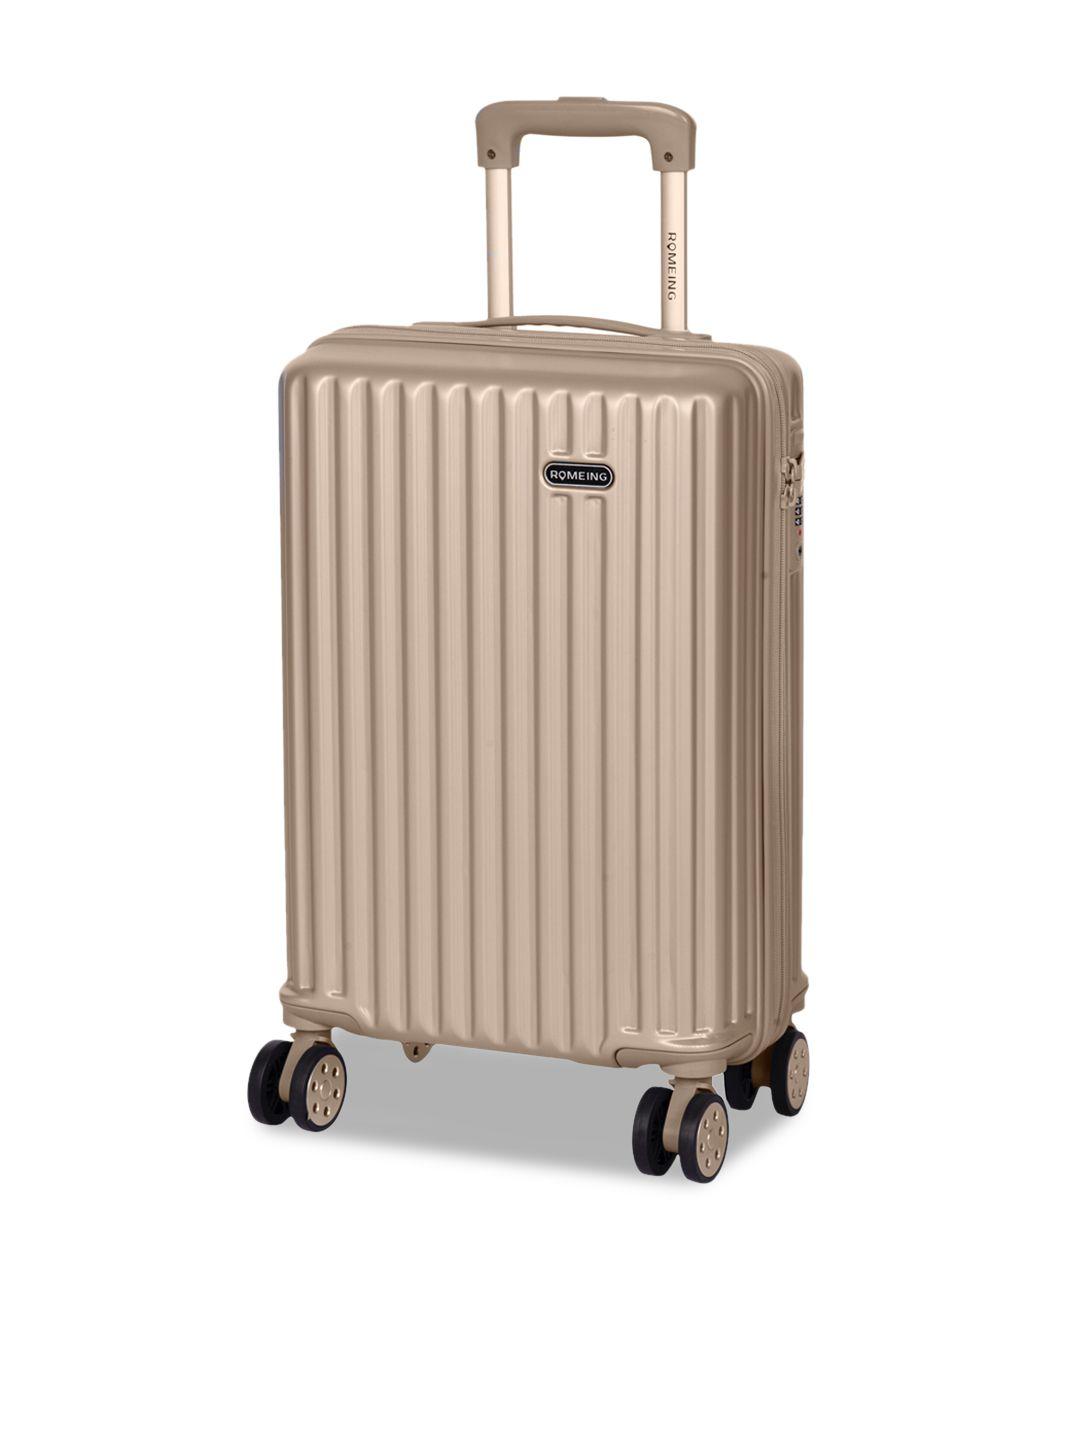 romeing genoa gold-toned polycarbonate hard-sided cabin trolley suitcase